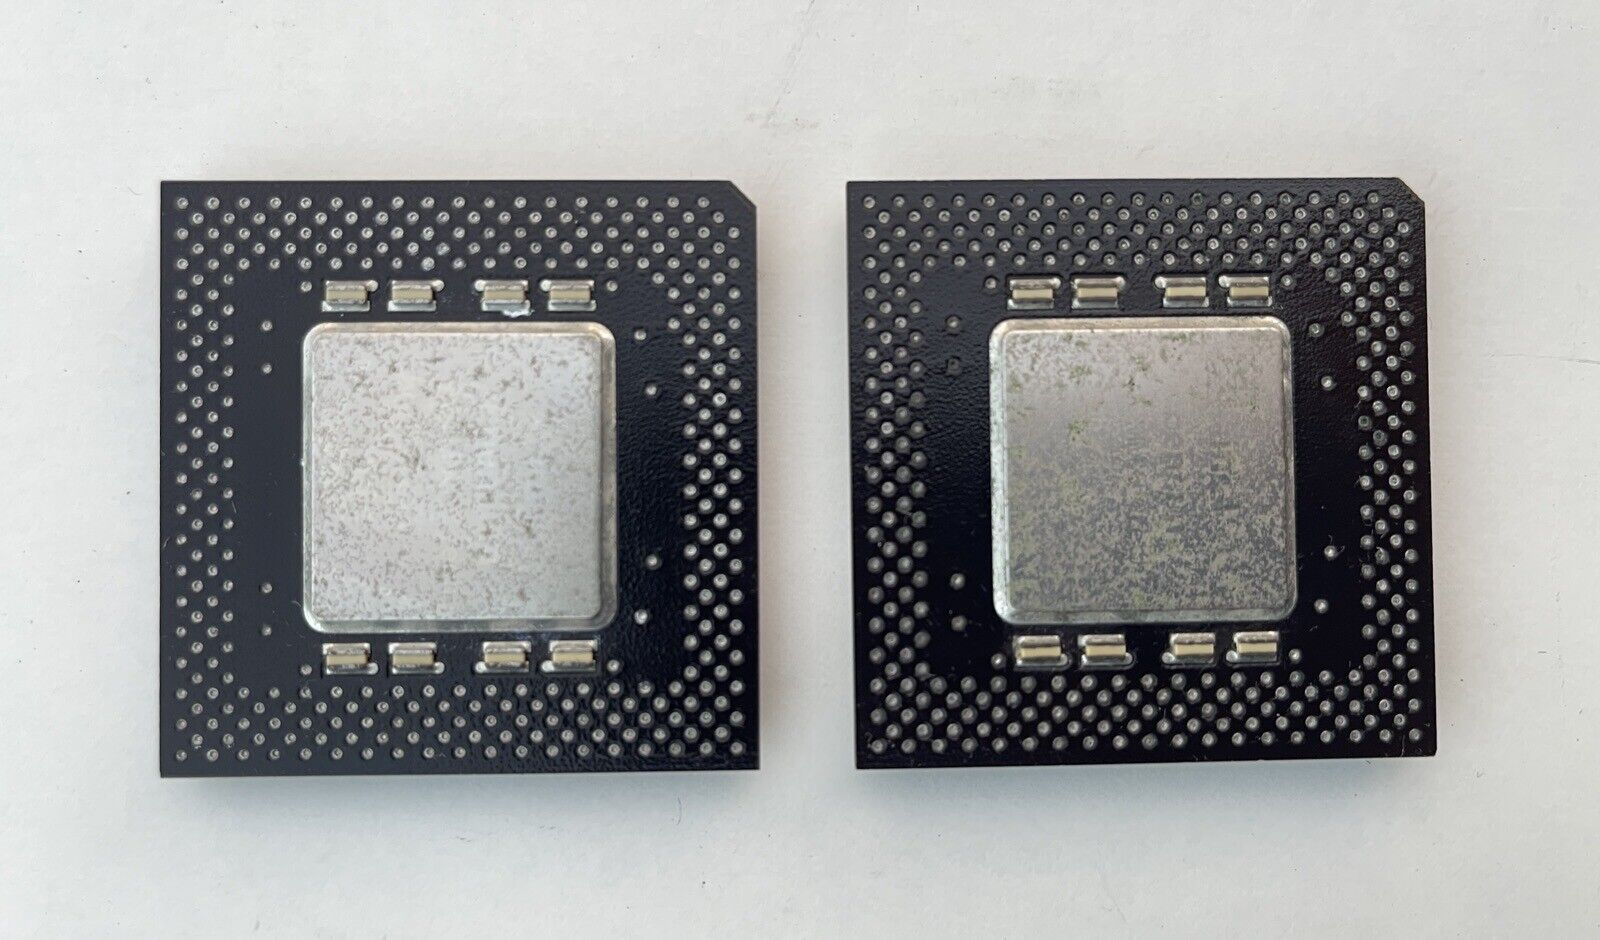 Vintage Processors CPU - Intel Pentium MMX 266 and MMX 200.Used.No tested.